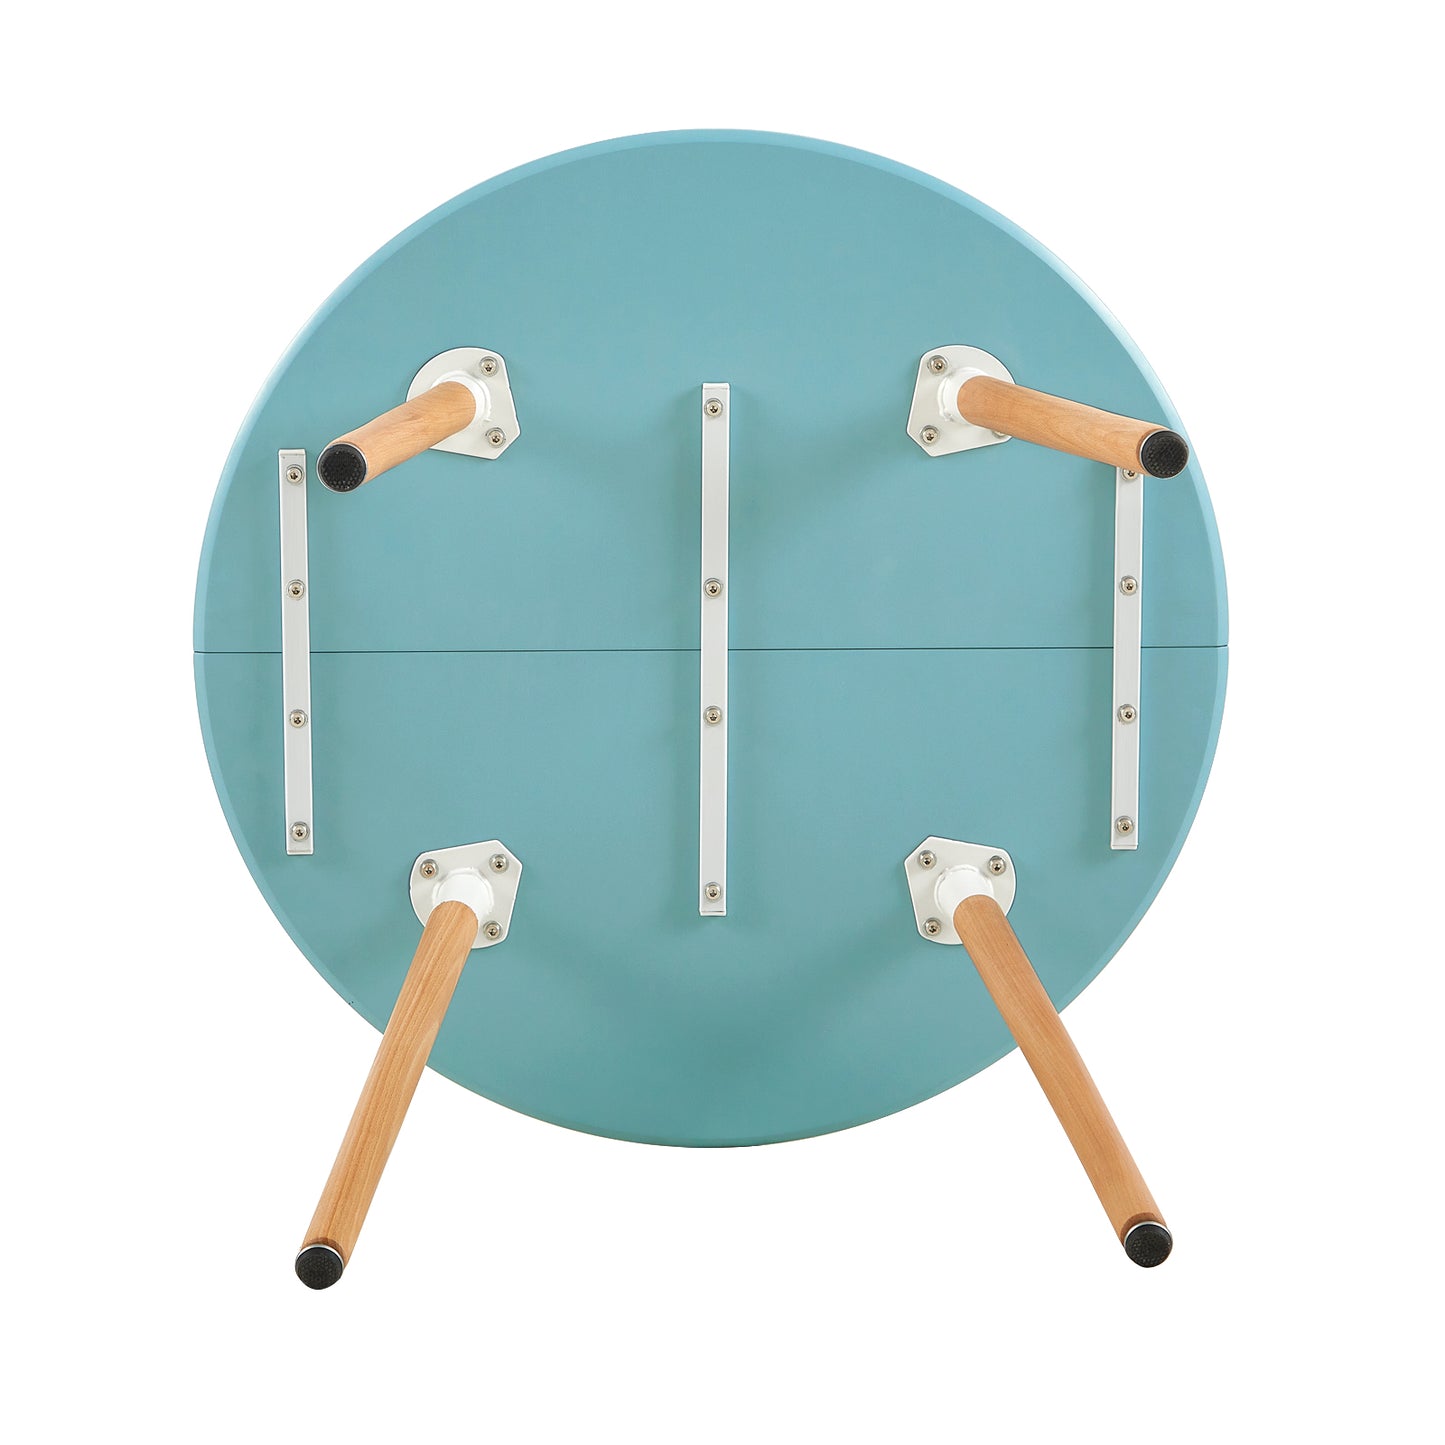 RONALD 80cm Circle Dining Table With Beech Legs - Light Blue